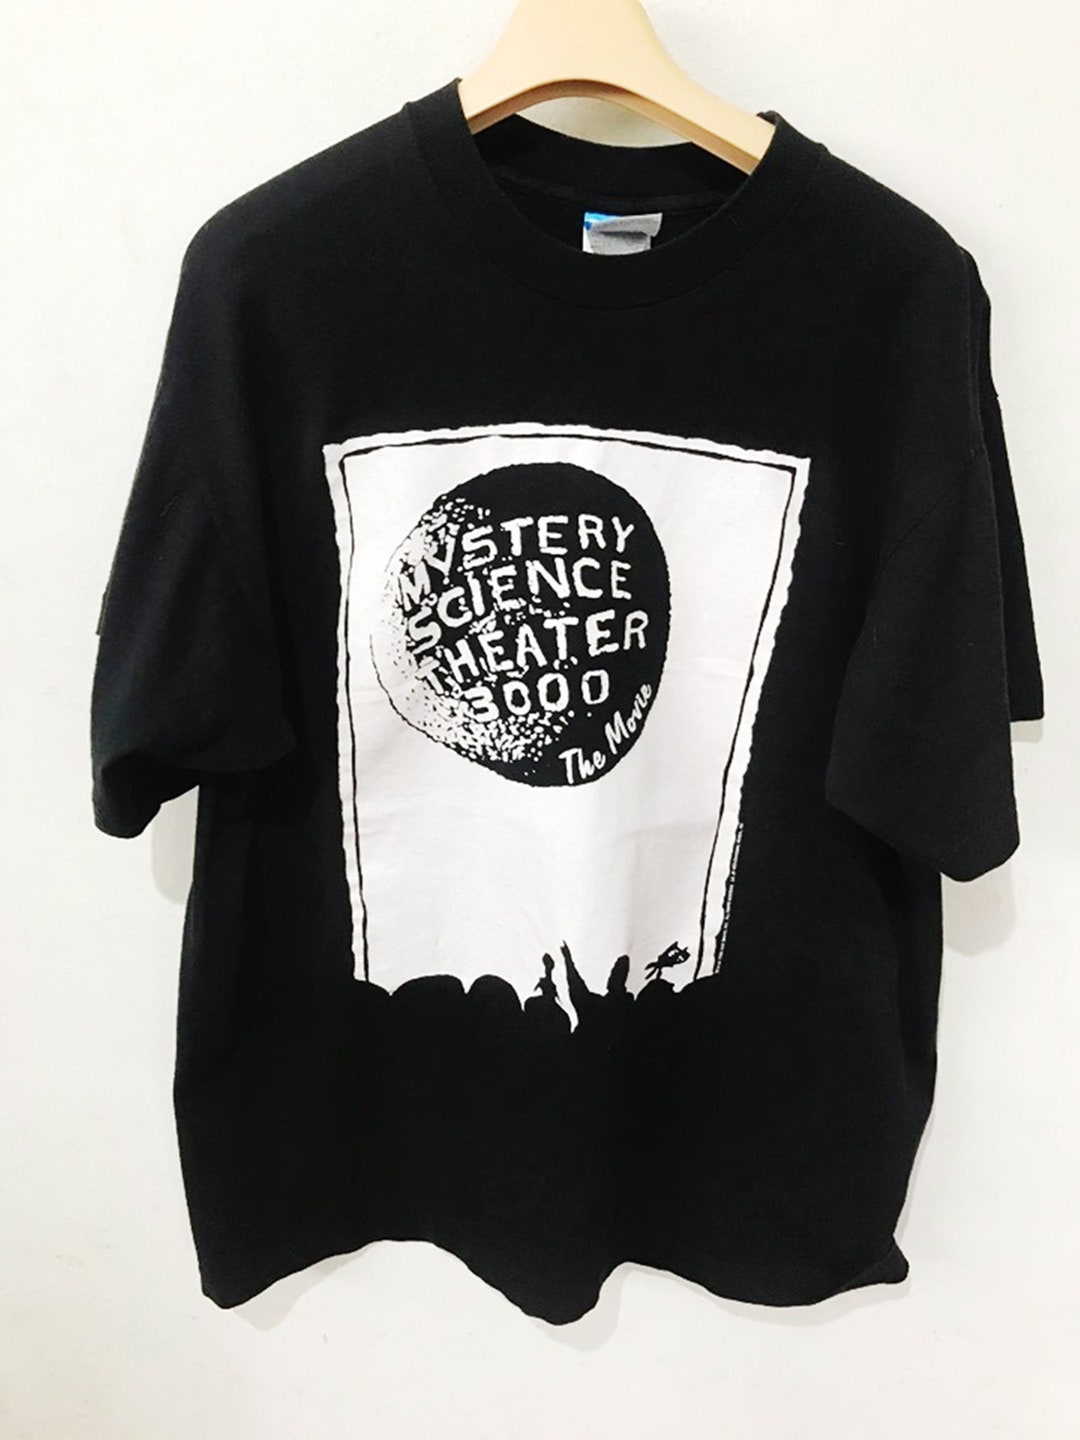 Vintage 1996 Mystery Science Theater 3000 Shirt Size L Free - Etsy